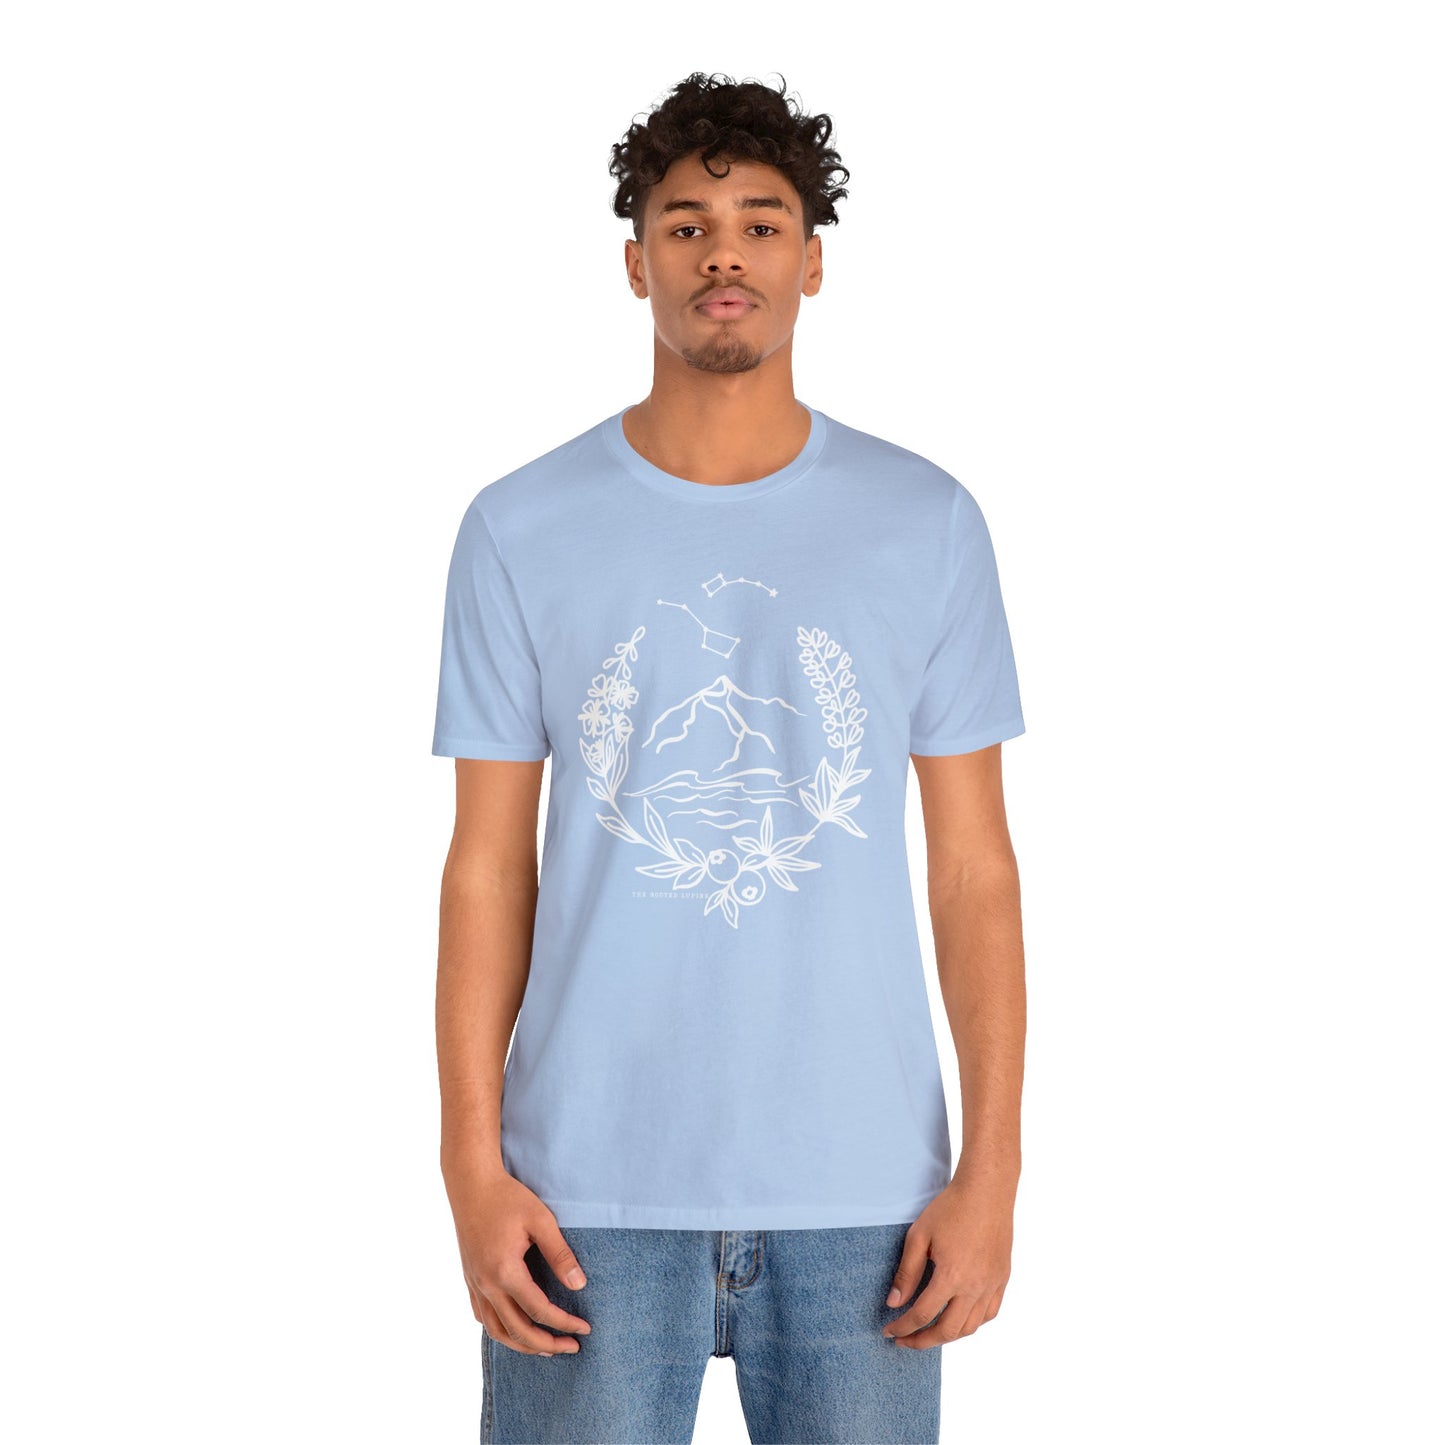 Mountains & Wild things Jersey T